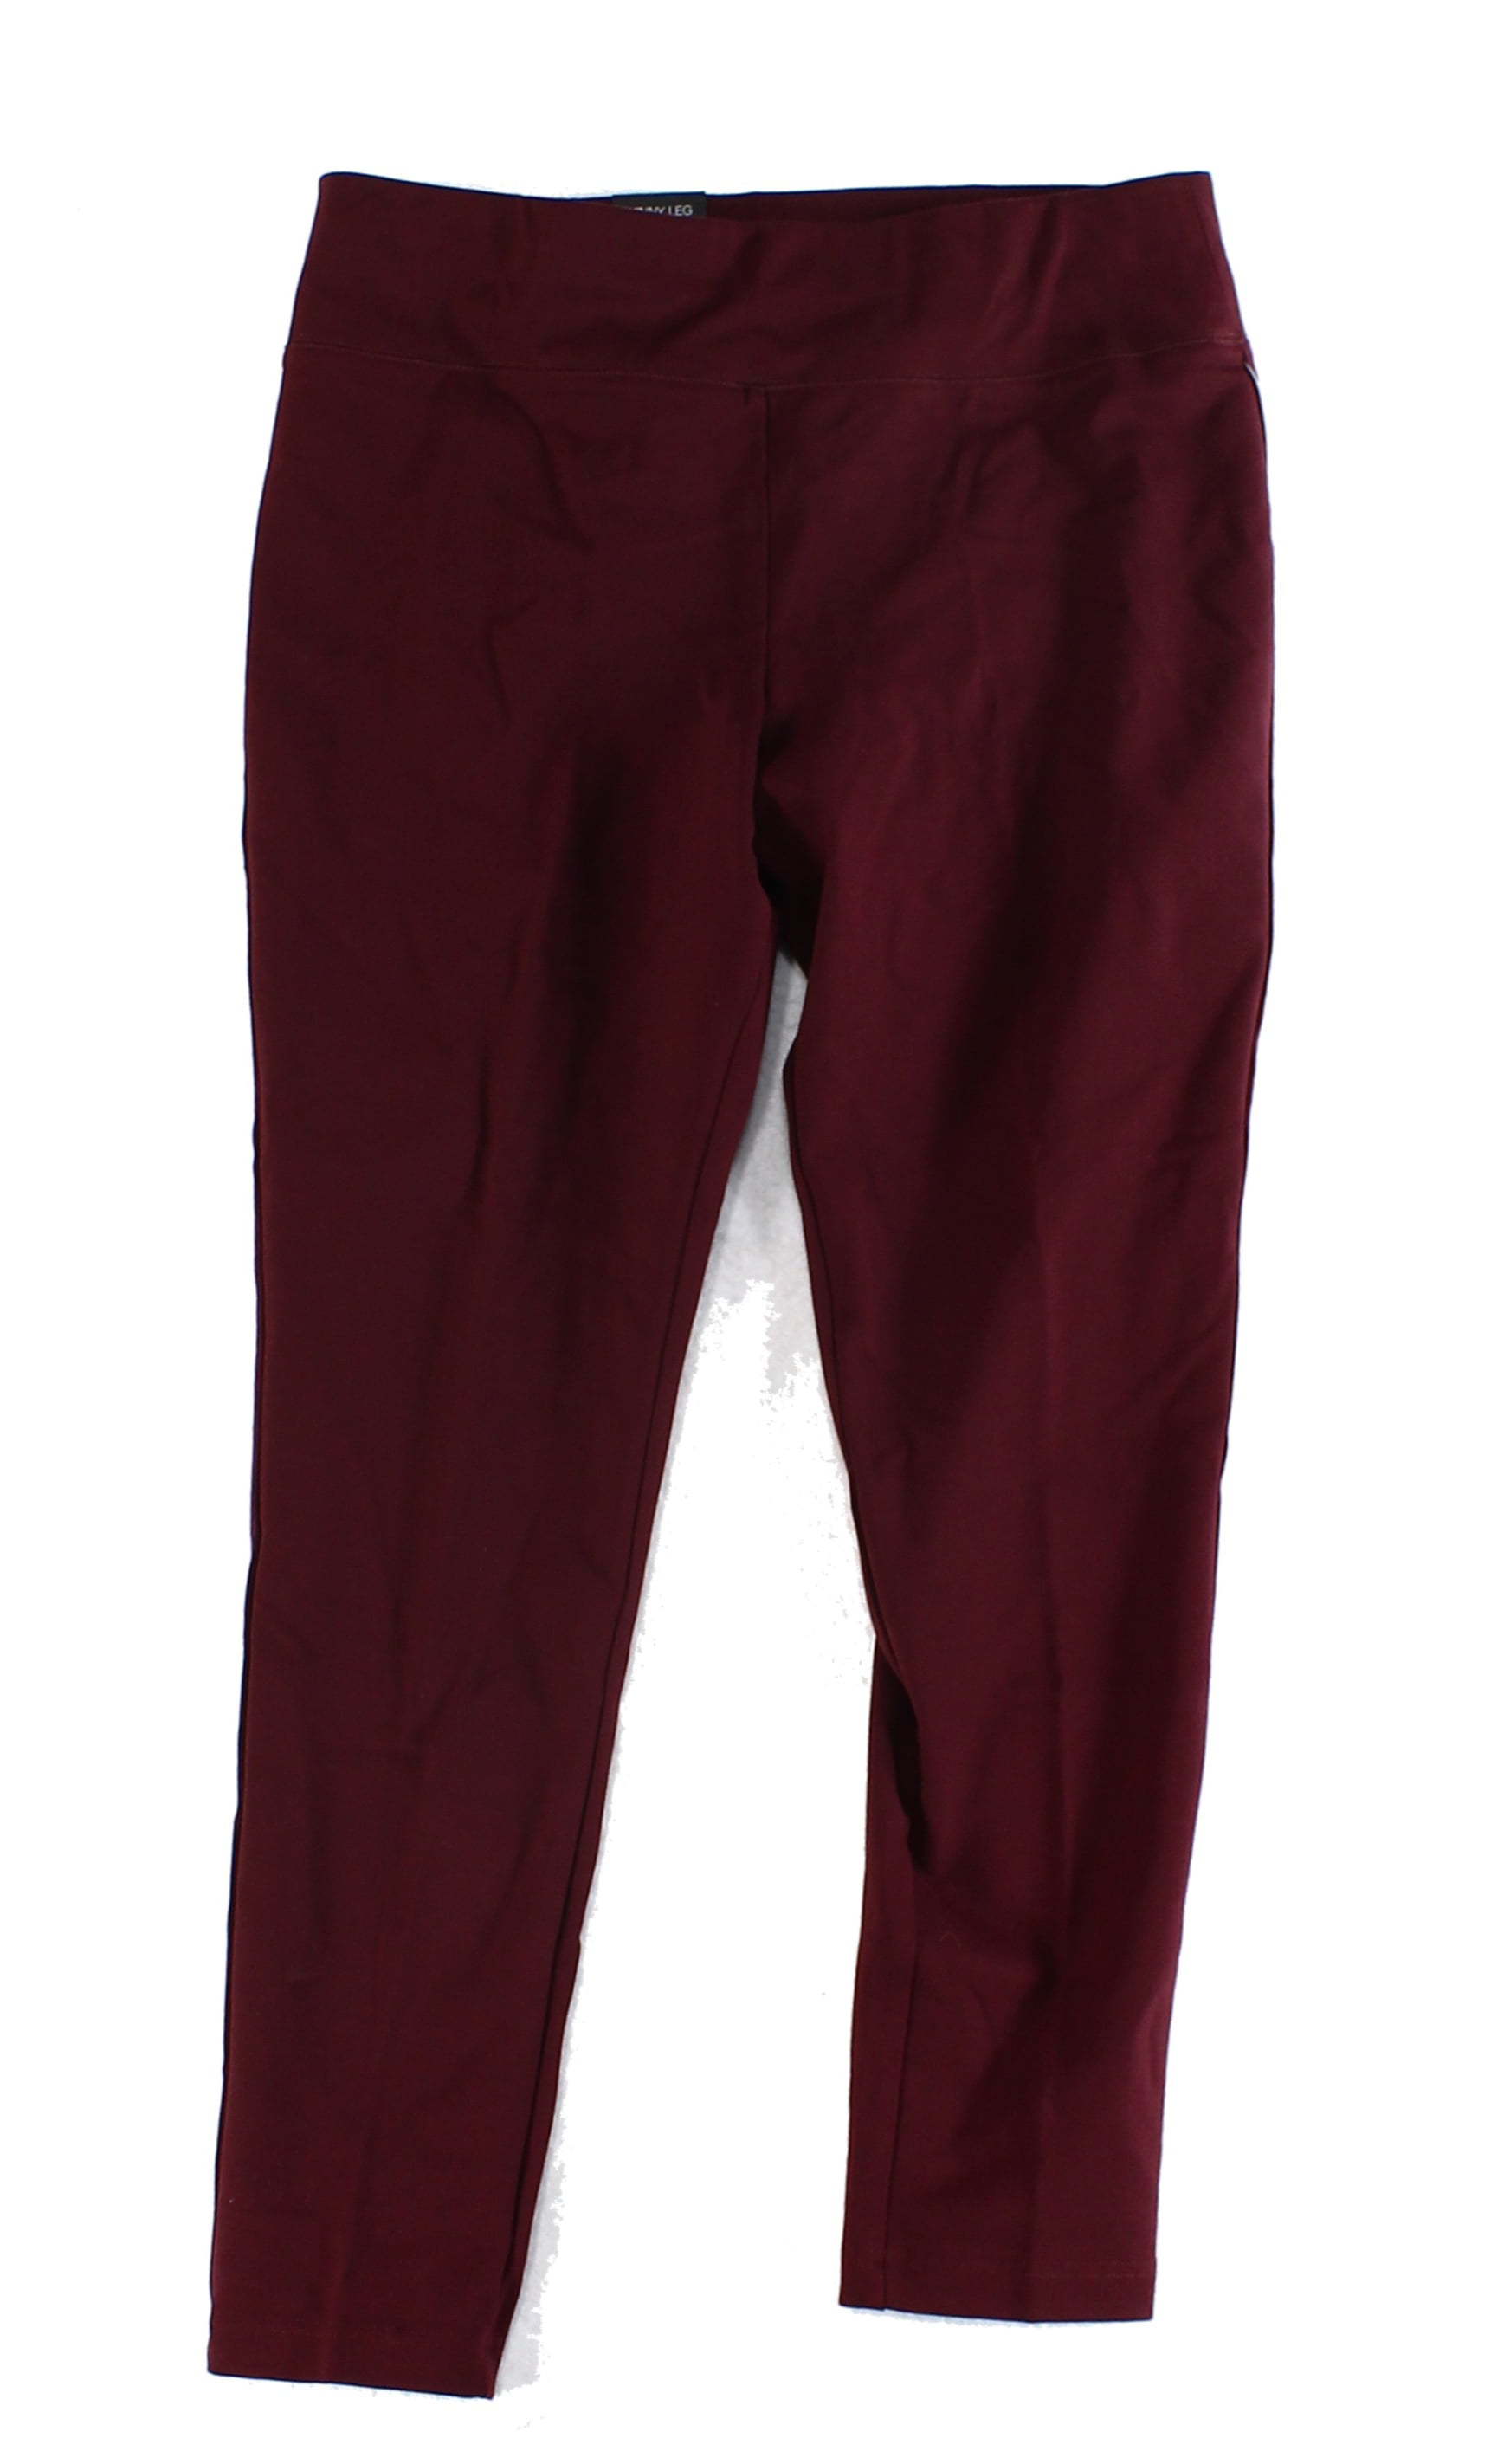 INC - INC NEW Burgundy Red Womens Size 16 Pull-On Stretch Skinny Casual ...